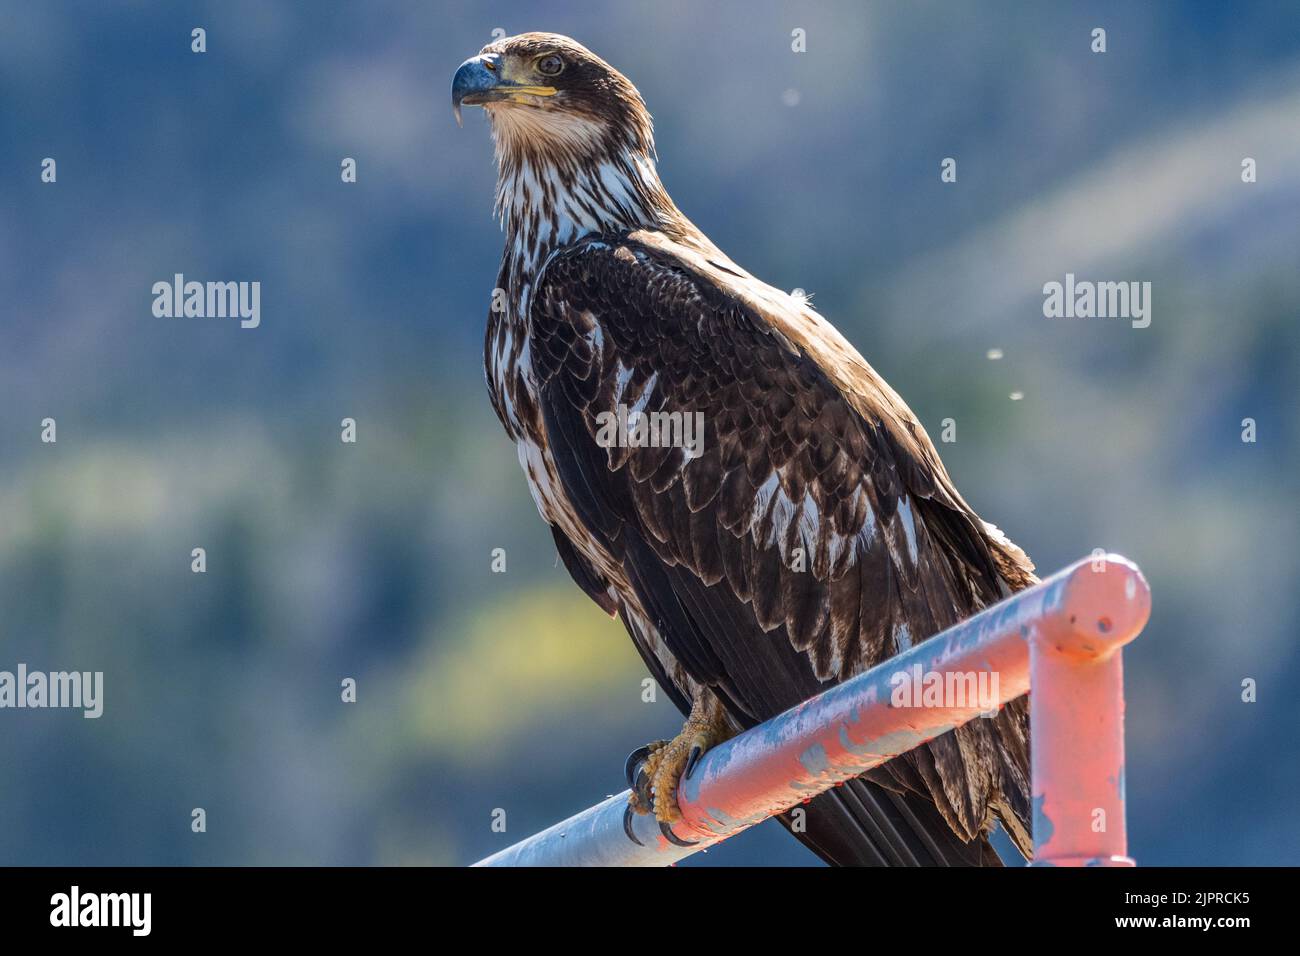 Wild bald eagle seen in natural outdoor environment during summer time in north America. Perched on a red, pole with blurred background in forest Stock Photo